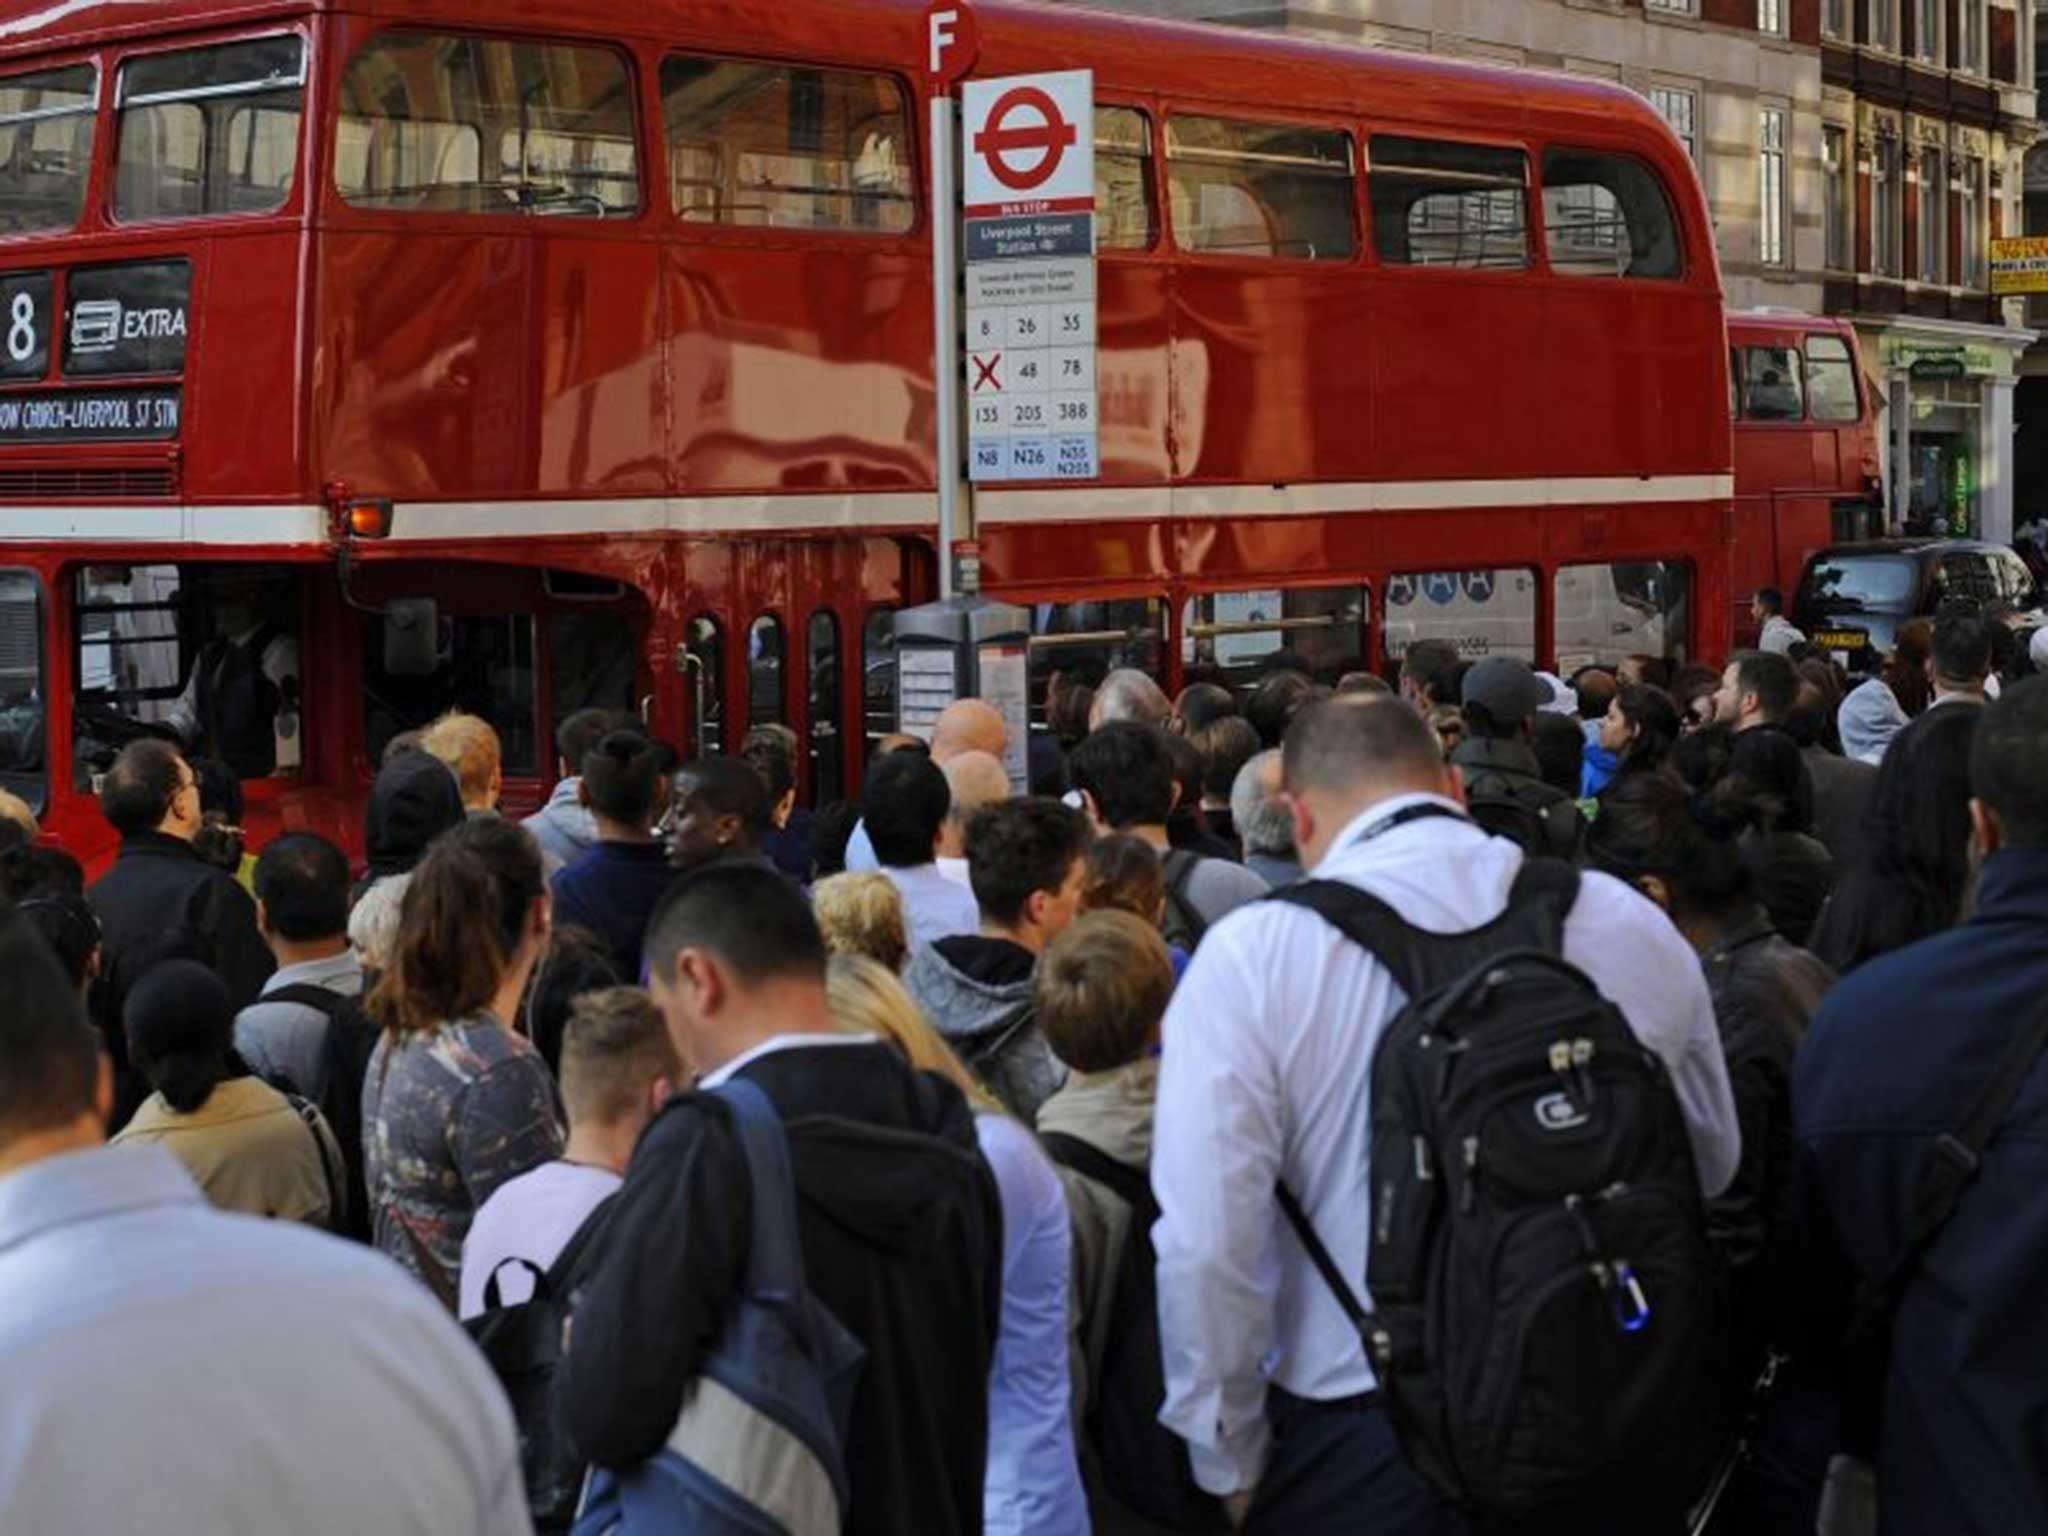 Better to work from home? Employees wait to get onto a bus